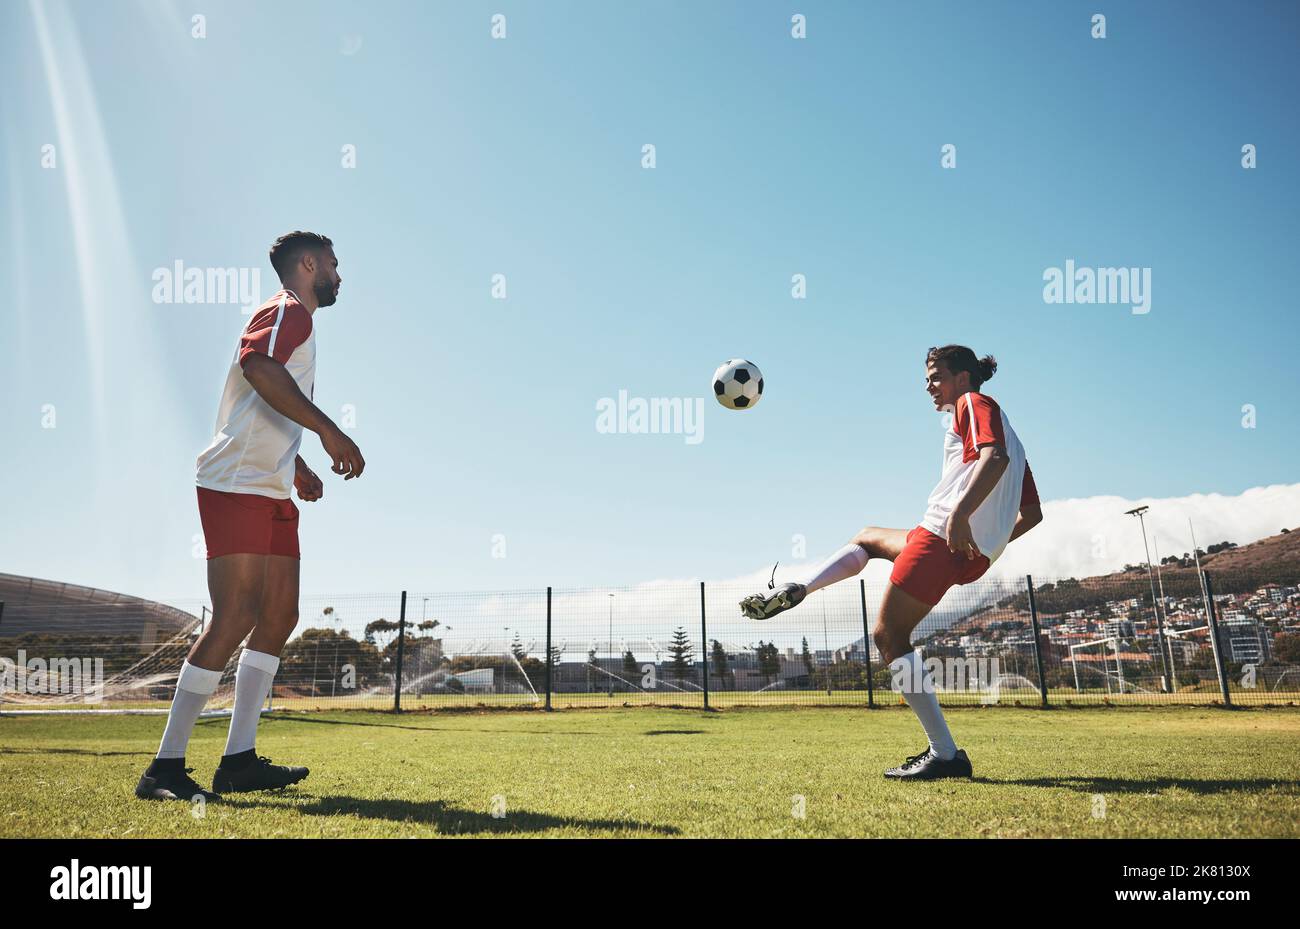 Soccer drill, kick and football workout with people ready for fitness, training and exercise on a field. Sports game, athlete men and fast energy of Stock Photo